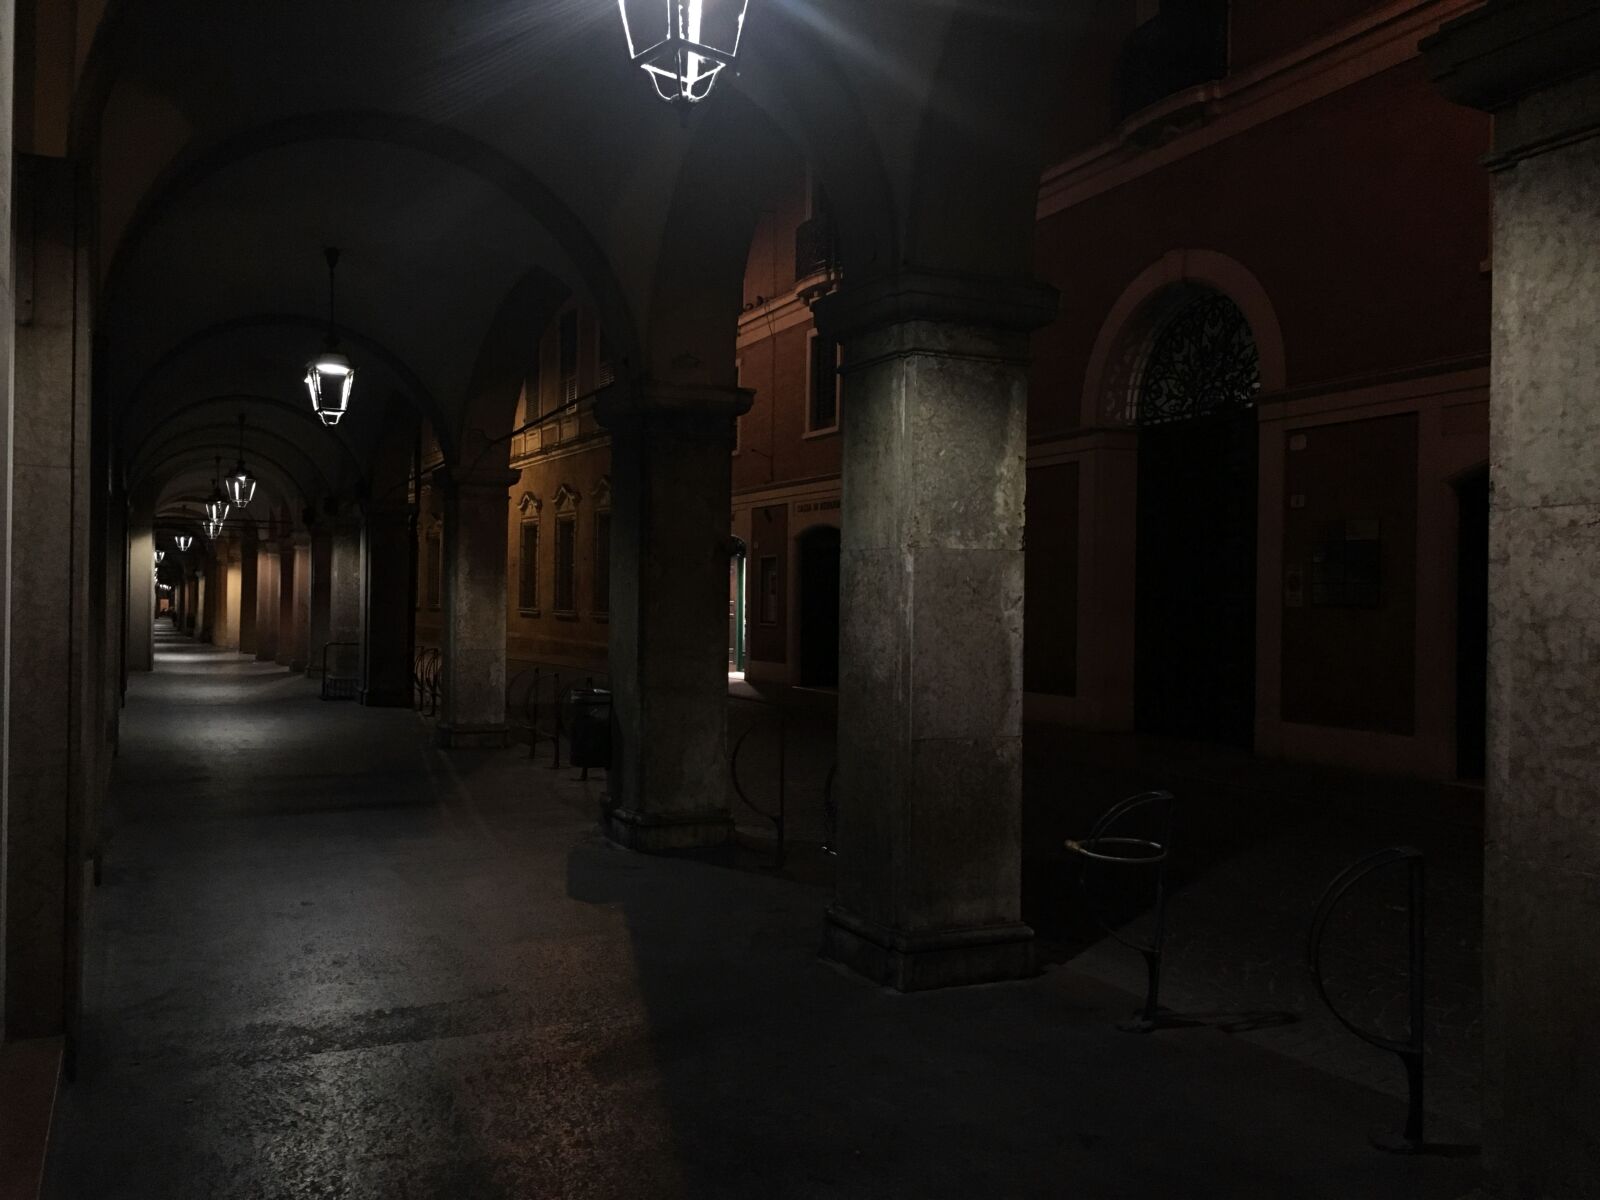 Jag.gr 645 PRO Mk III for Apple iPhone 6s sample photo. Modena, porch, lights photography